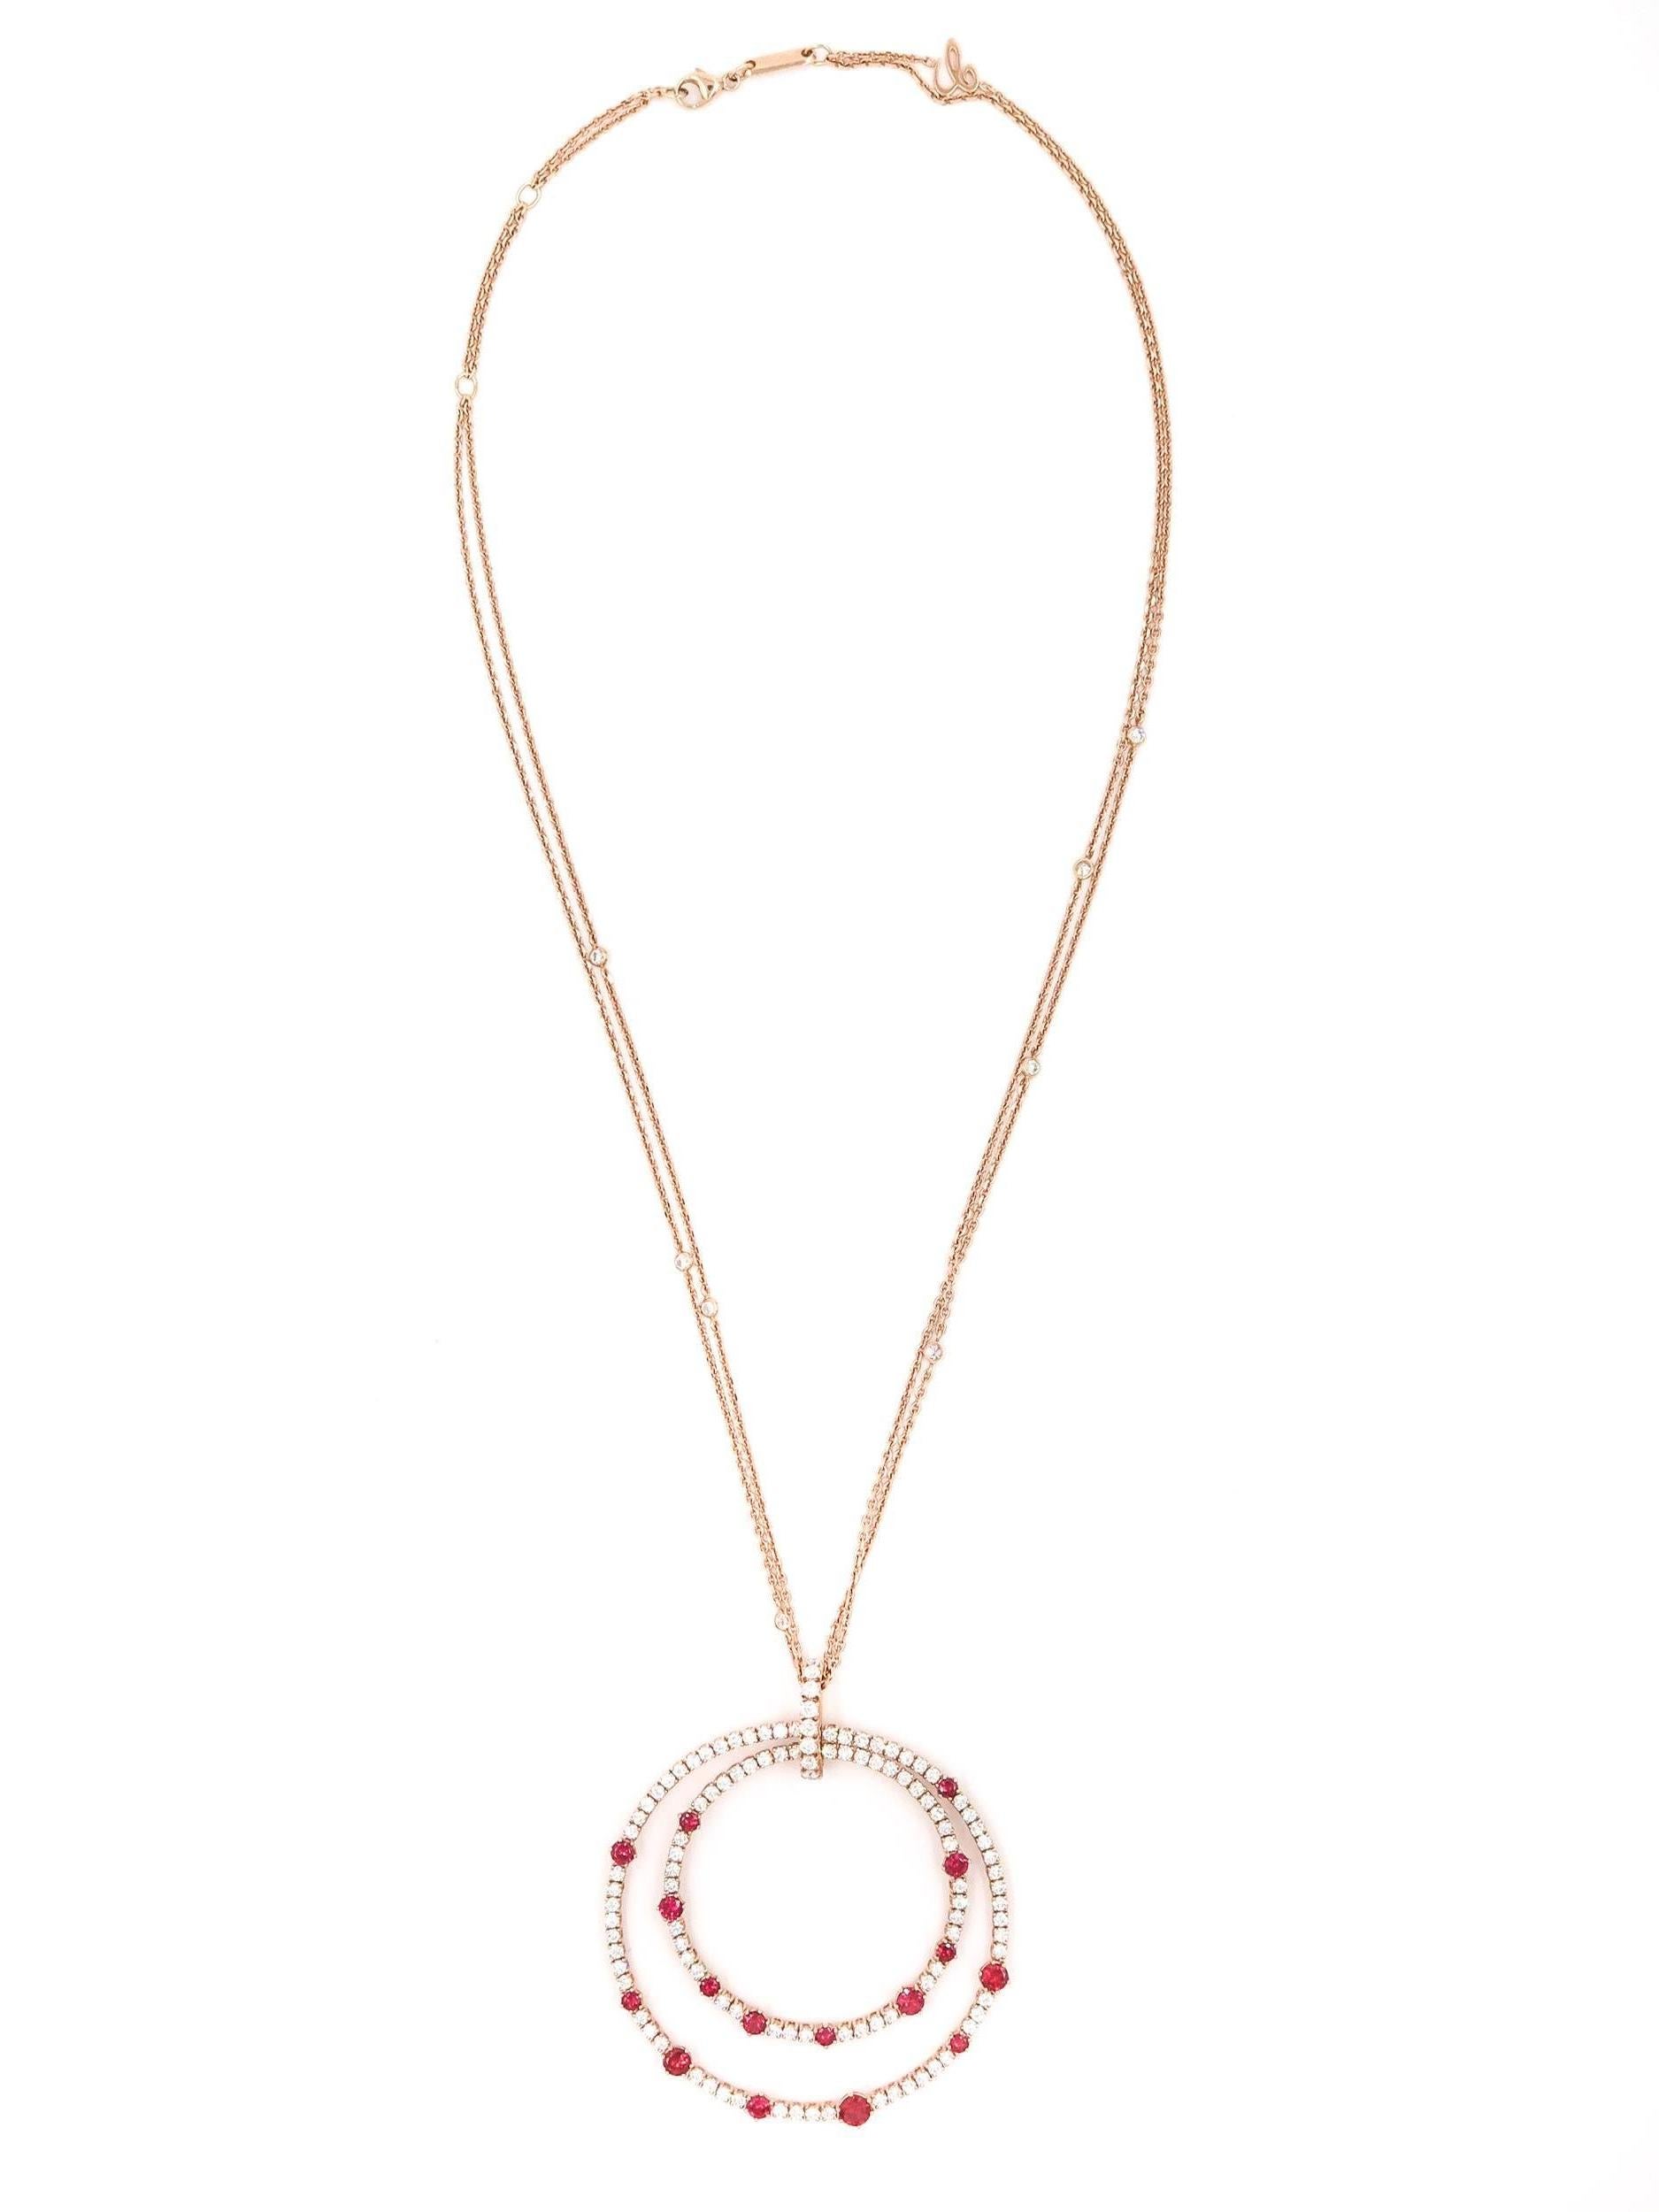 The exceptional beauty and elegance of the diamonds with vibrant rubies leaves no wish for sparkles unfulfilled. 
The tenderness of the 18 karat rose gold with its graceful curves makes this necklace a perfect complement to her style.
L'Heure du